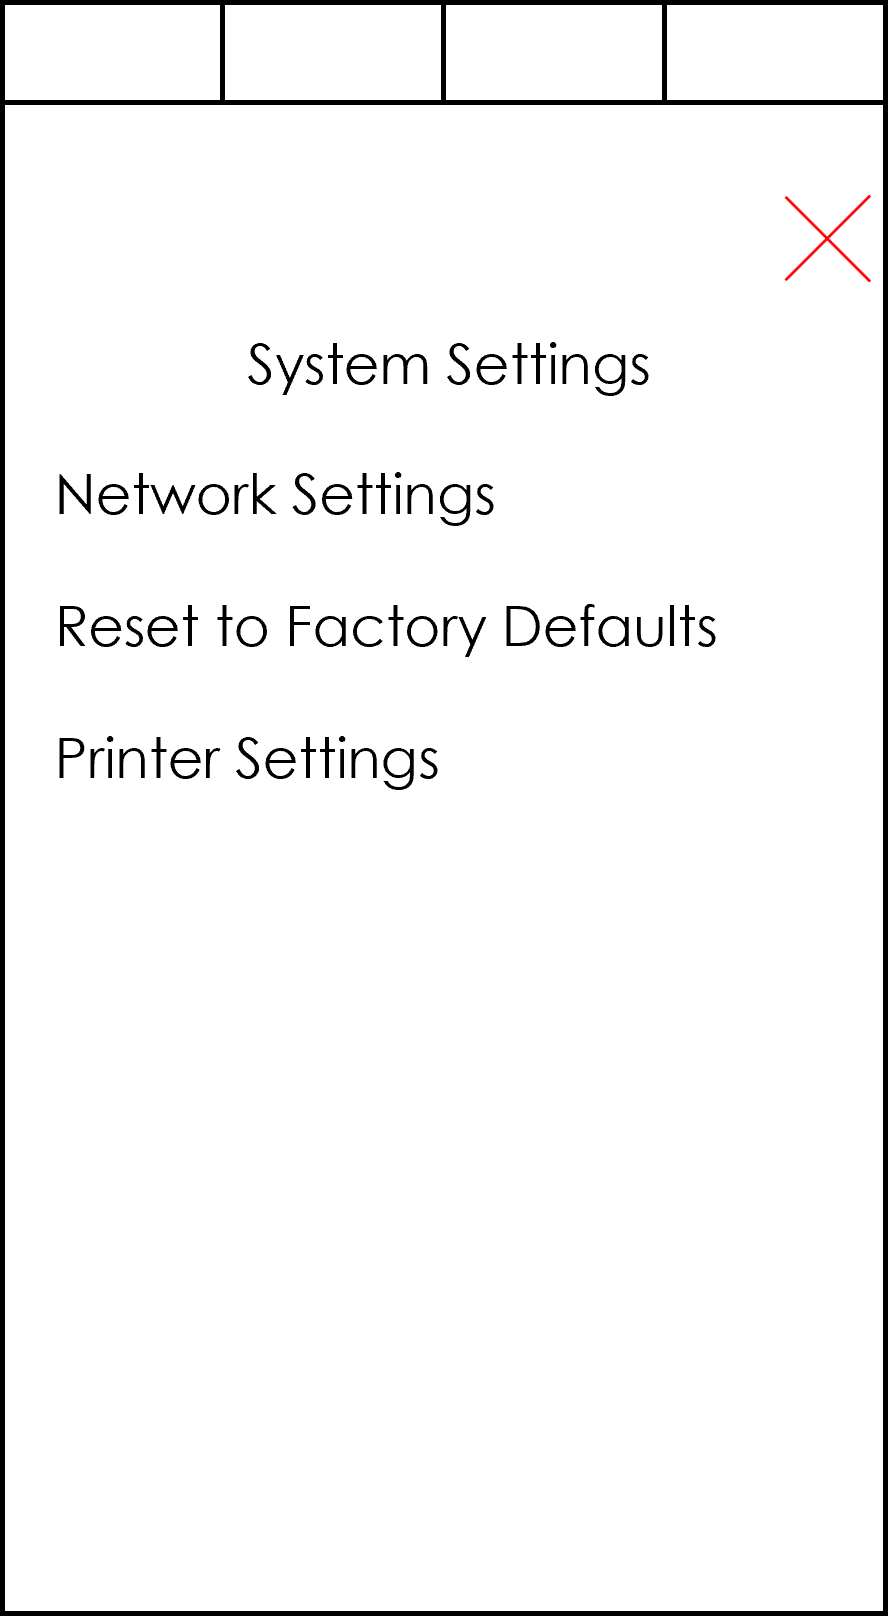 smartpos-systemsettings-01-2506-en.png